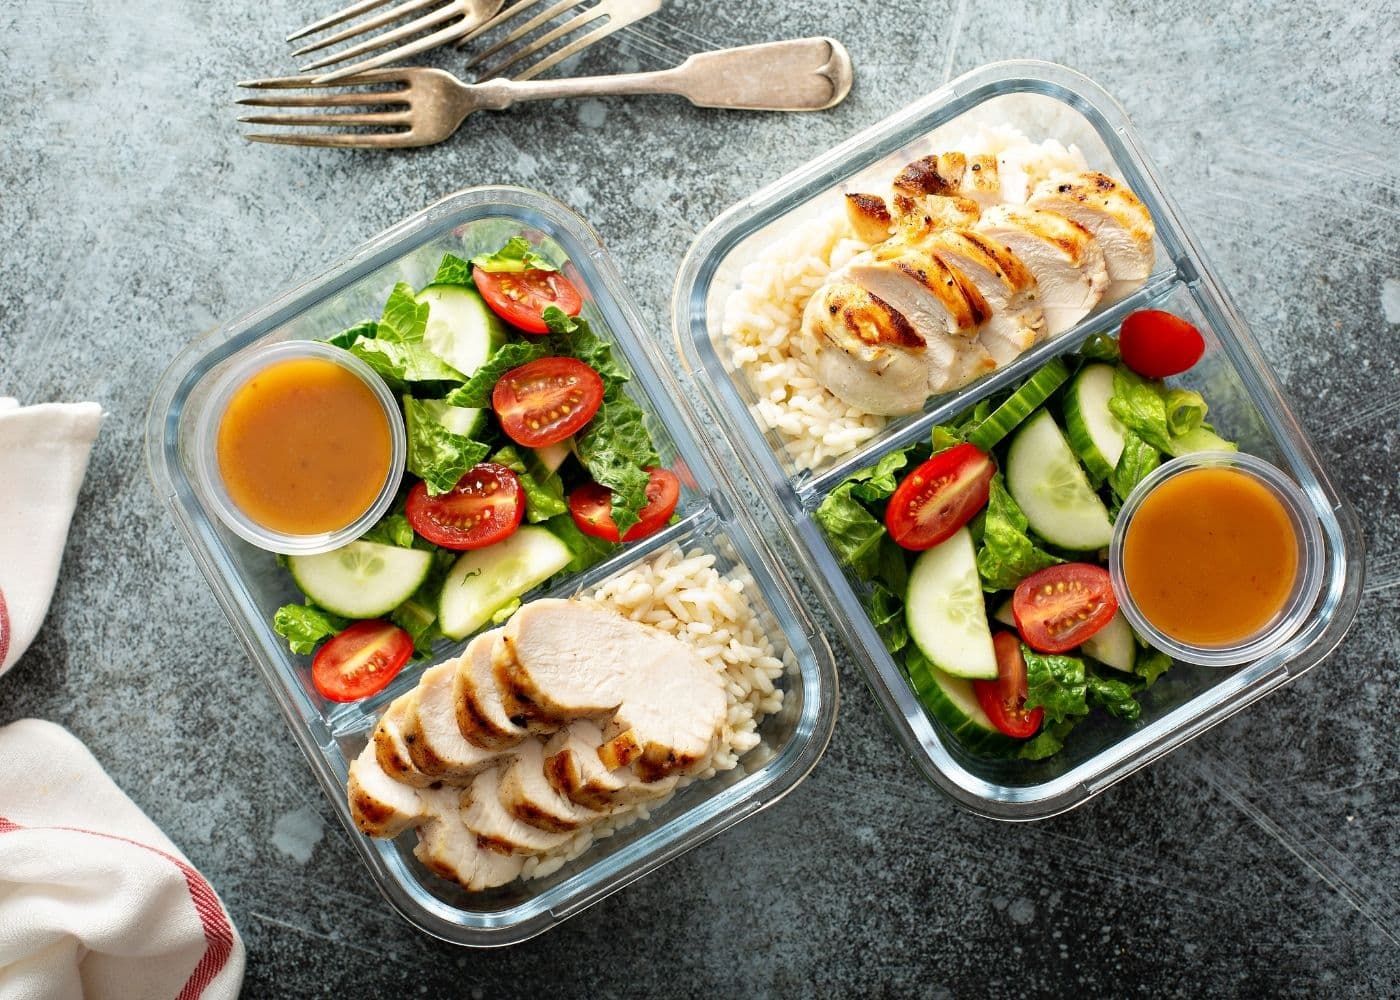 Meal Prep Ideas - The Clean Eating Couple